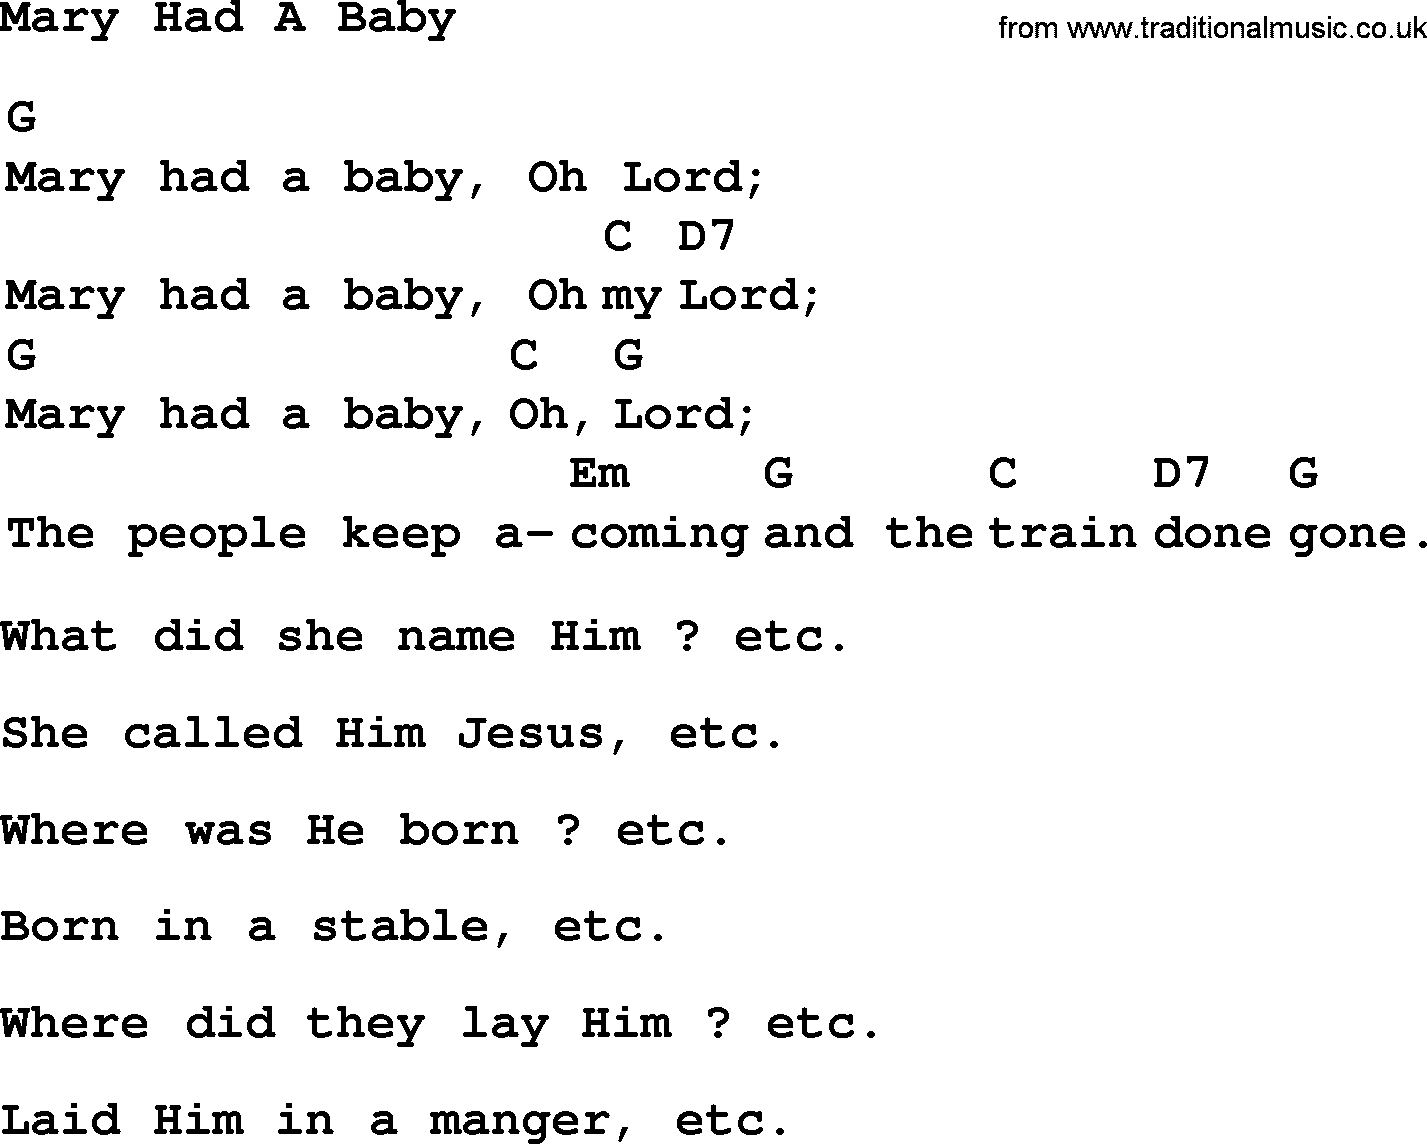 Top 1000 Most Popular Folk and Old-time Songs: Mary Had A Baby, lyrics and chords